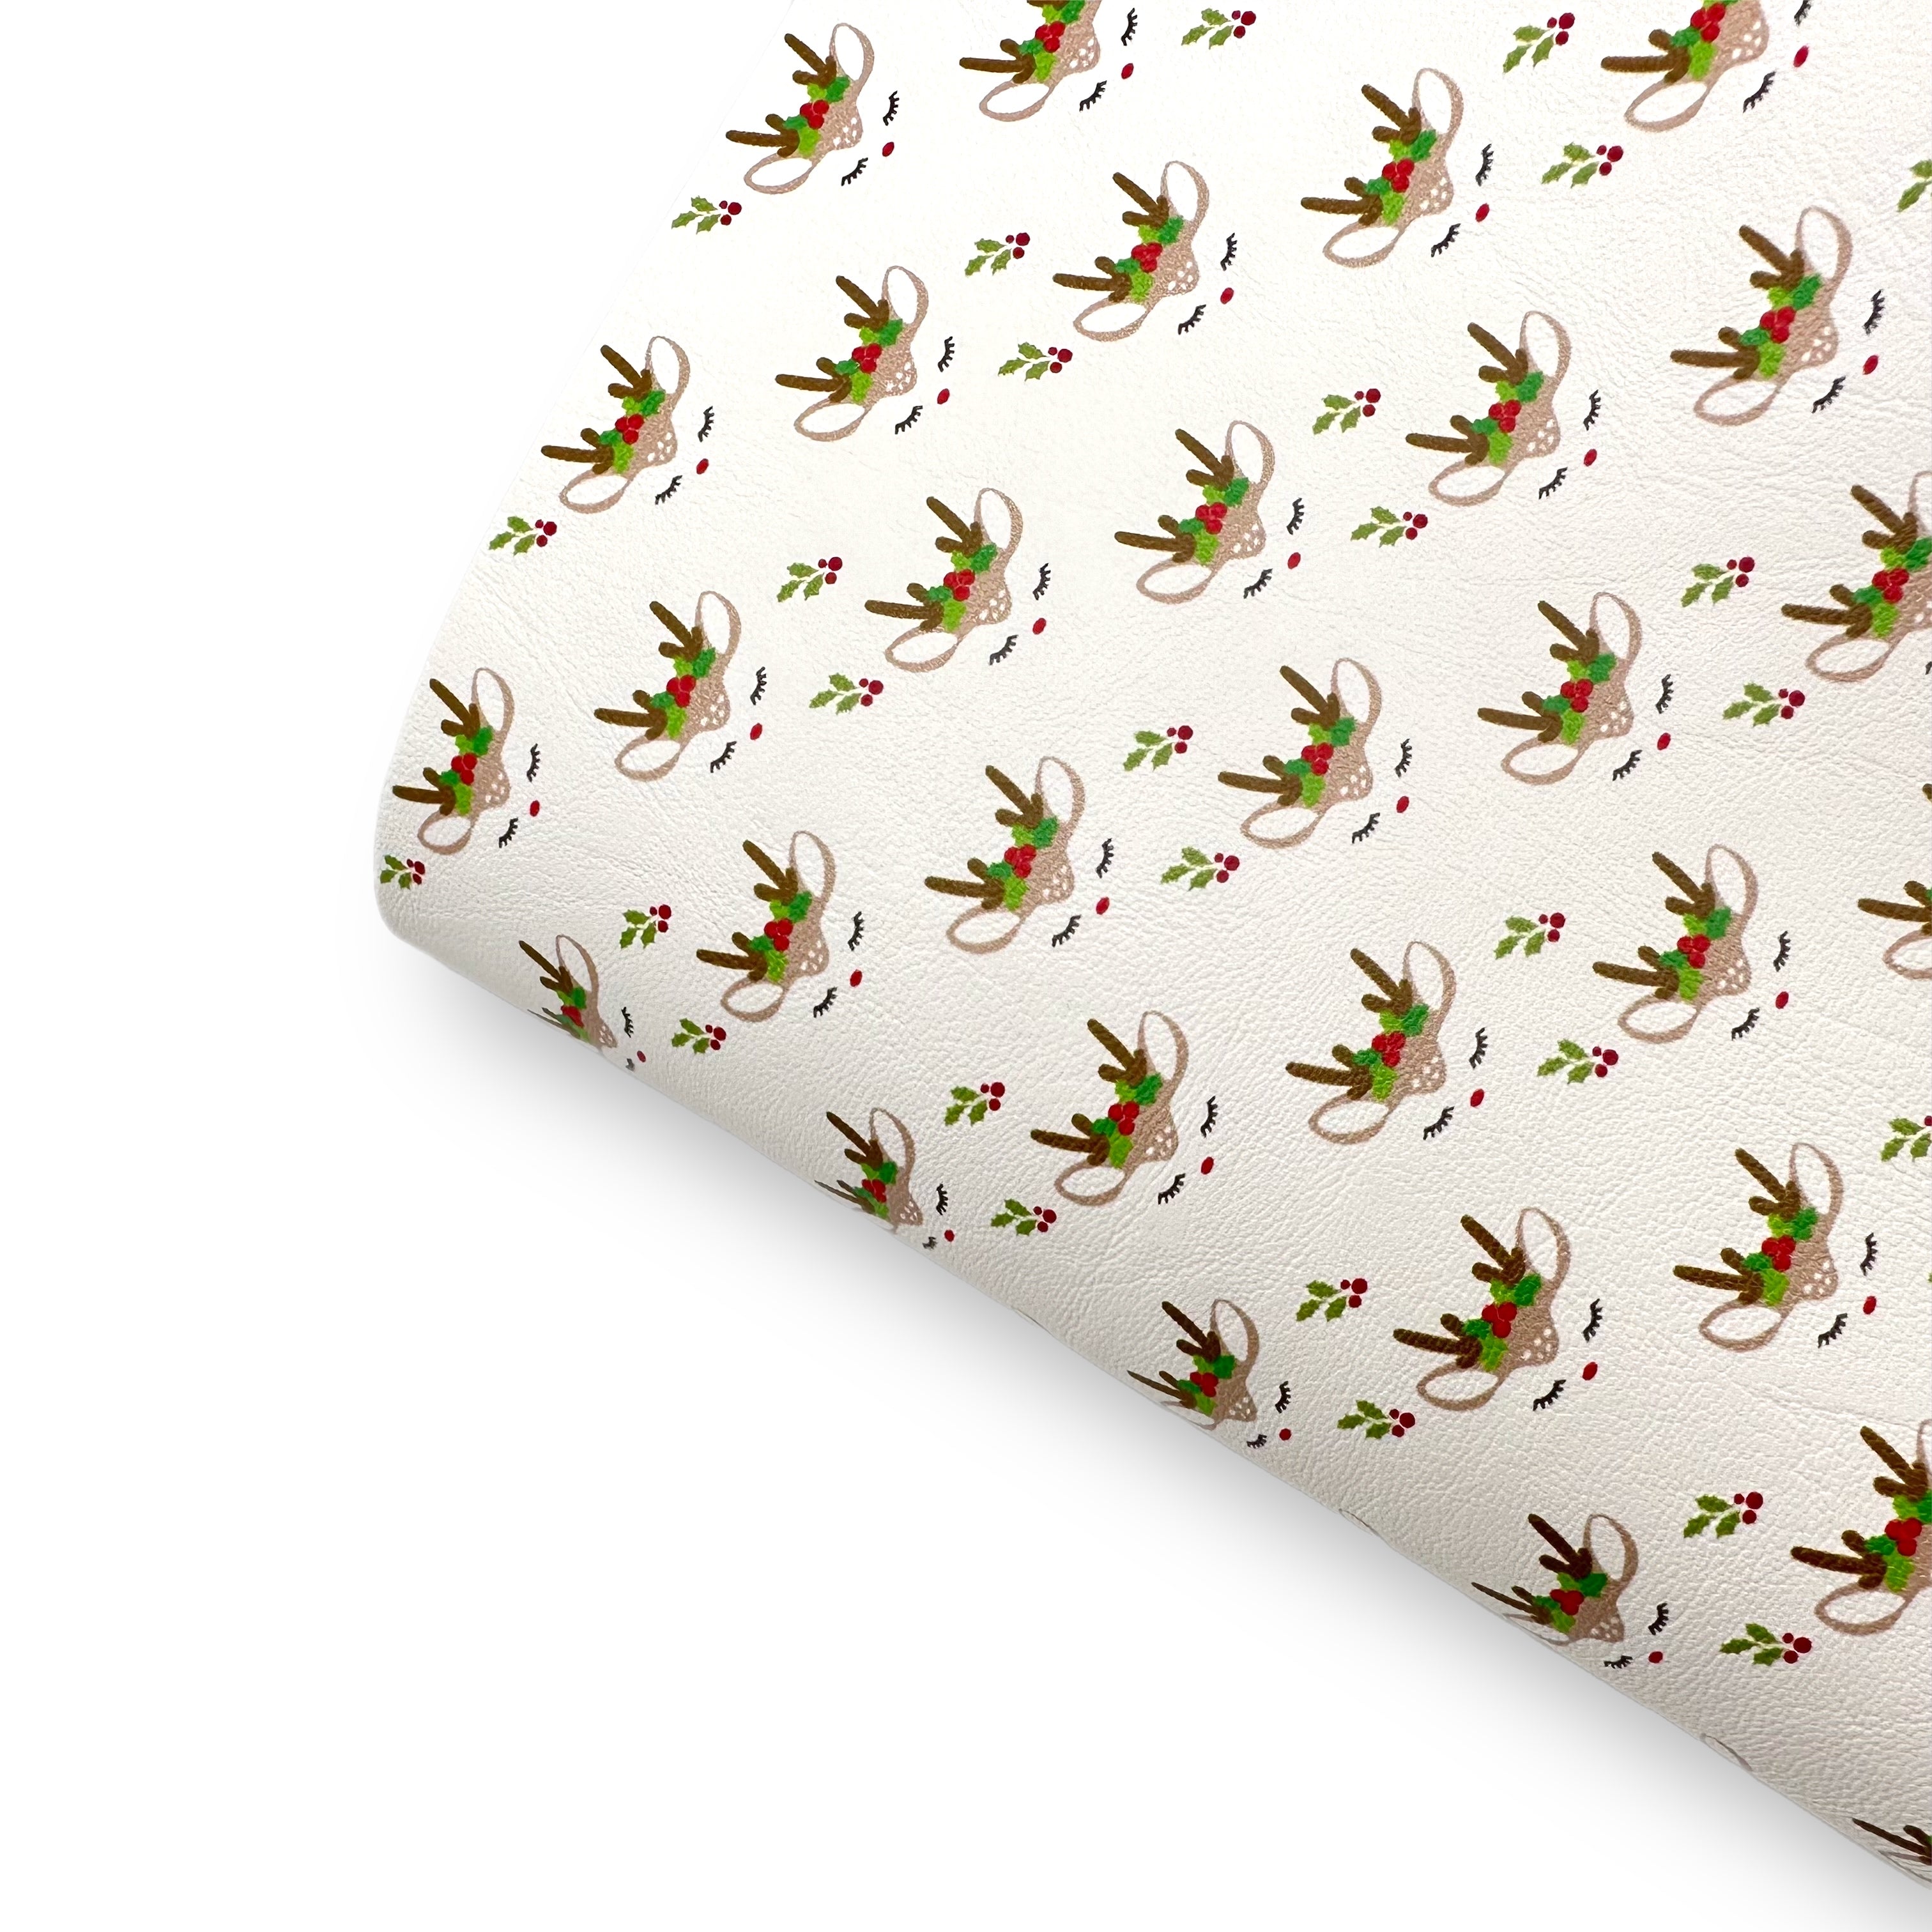 Little Deer Premium Faux Leather Fabric Sheets